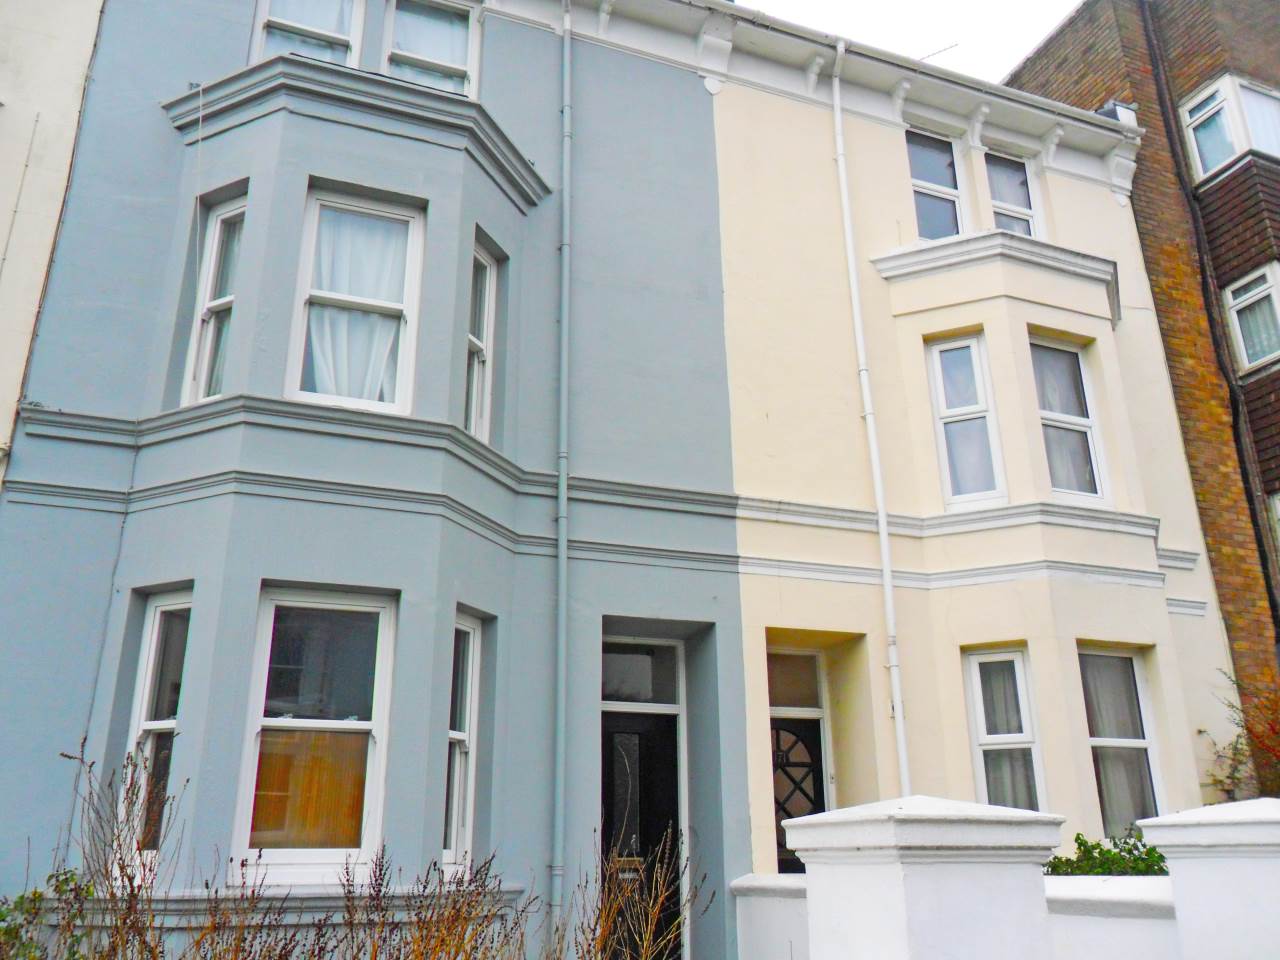 6 bed house to rent in Queen's Park Road, Brighton, BN2 